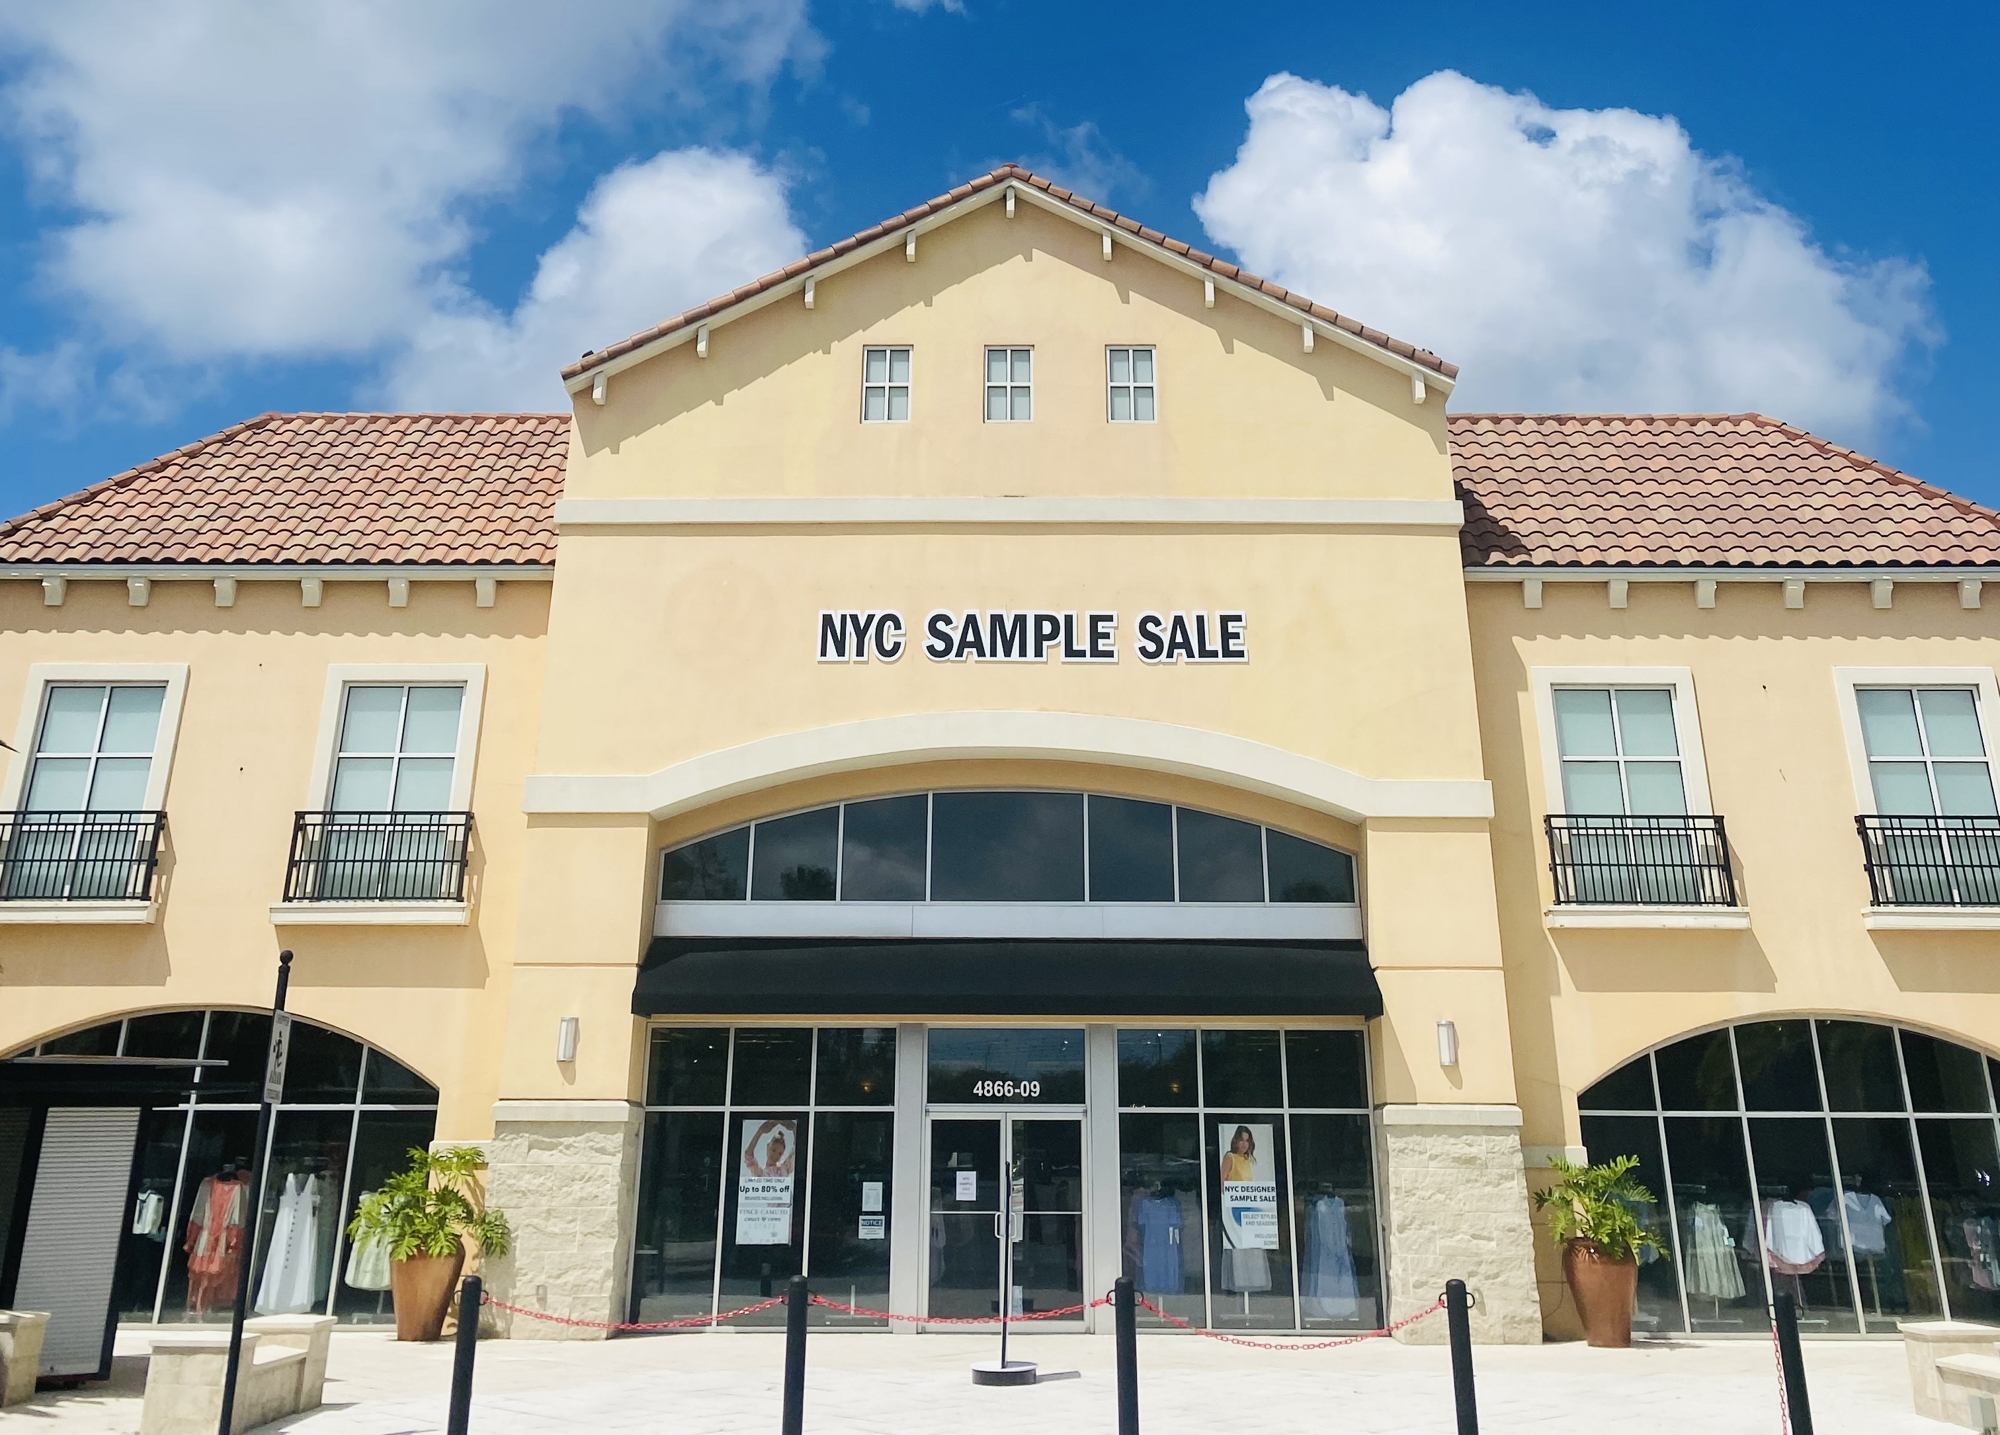 NYC Sample Sale is in the former Versona store space in The Markets at Town Center.